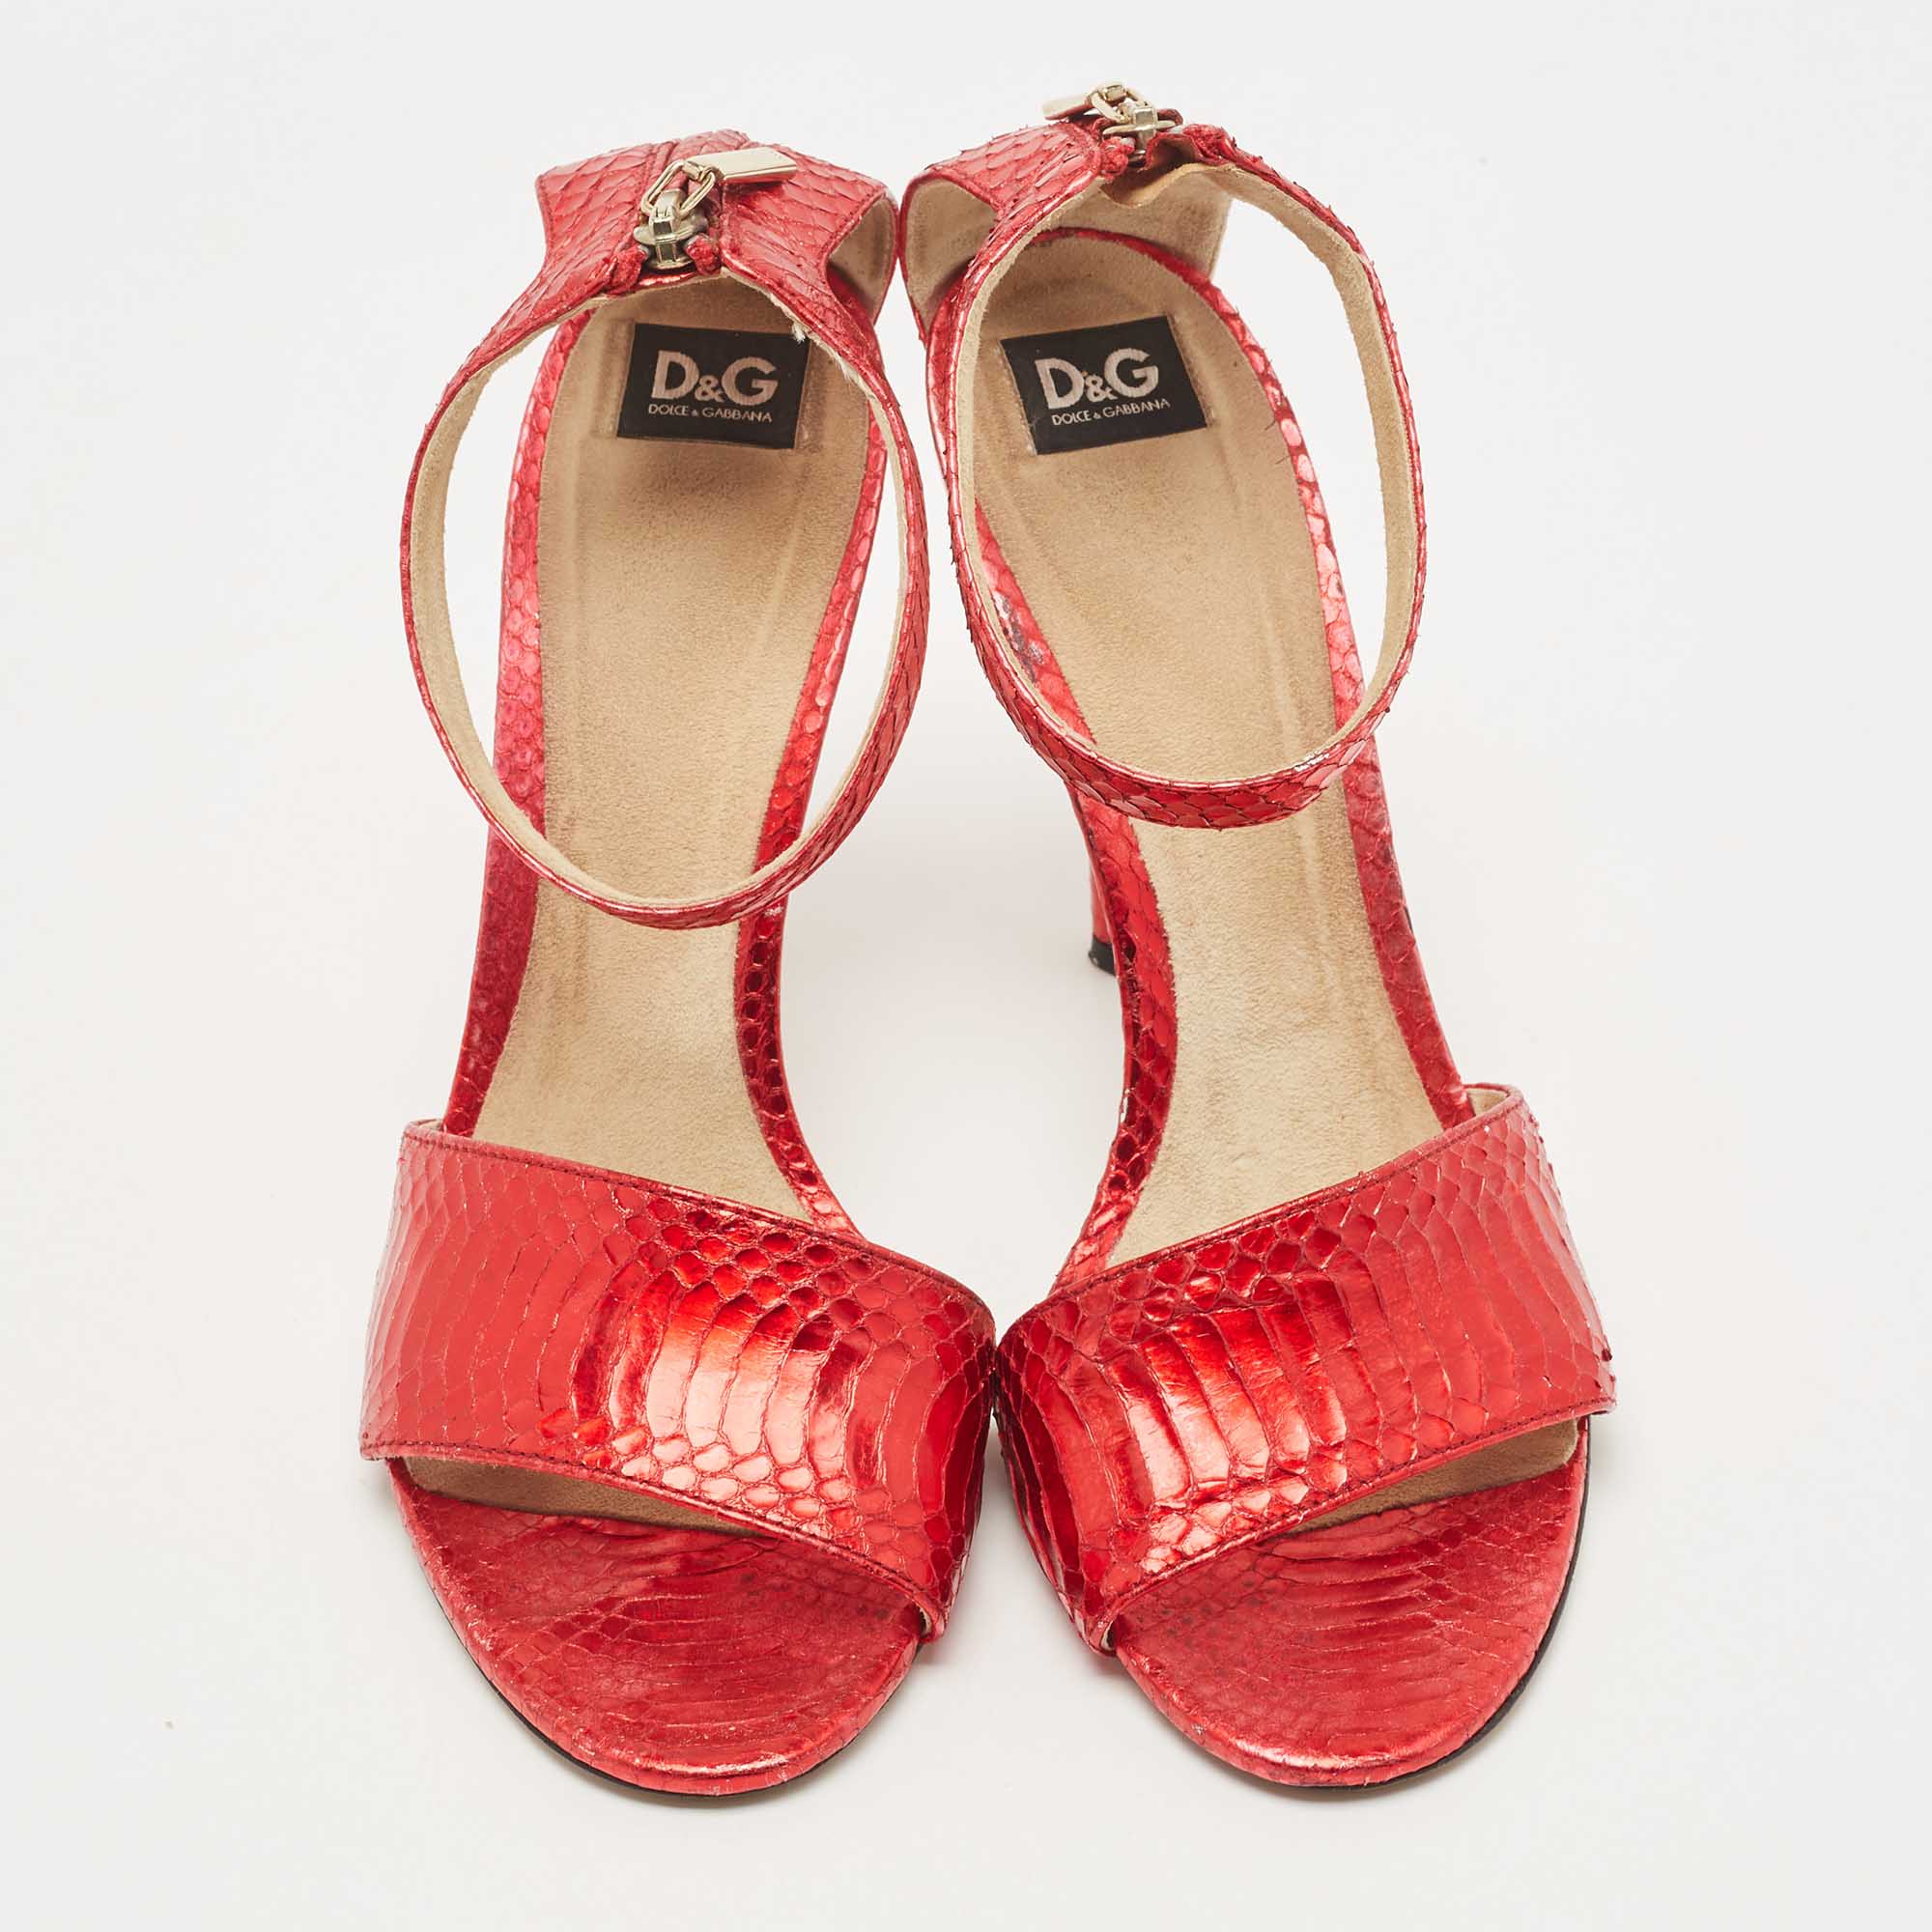 Dolce & Gabbana Red Python Leather Ankle Strap Sandals Size 39